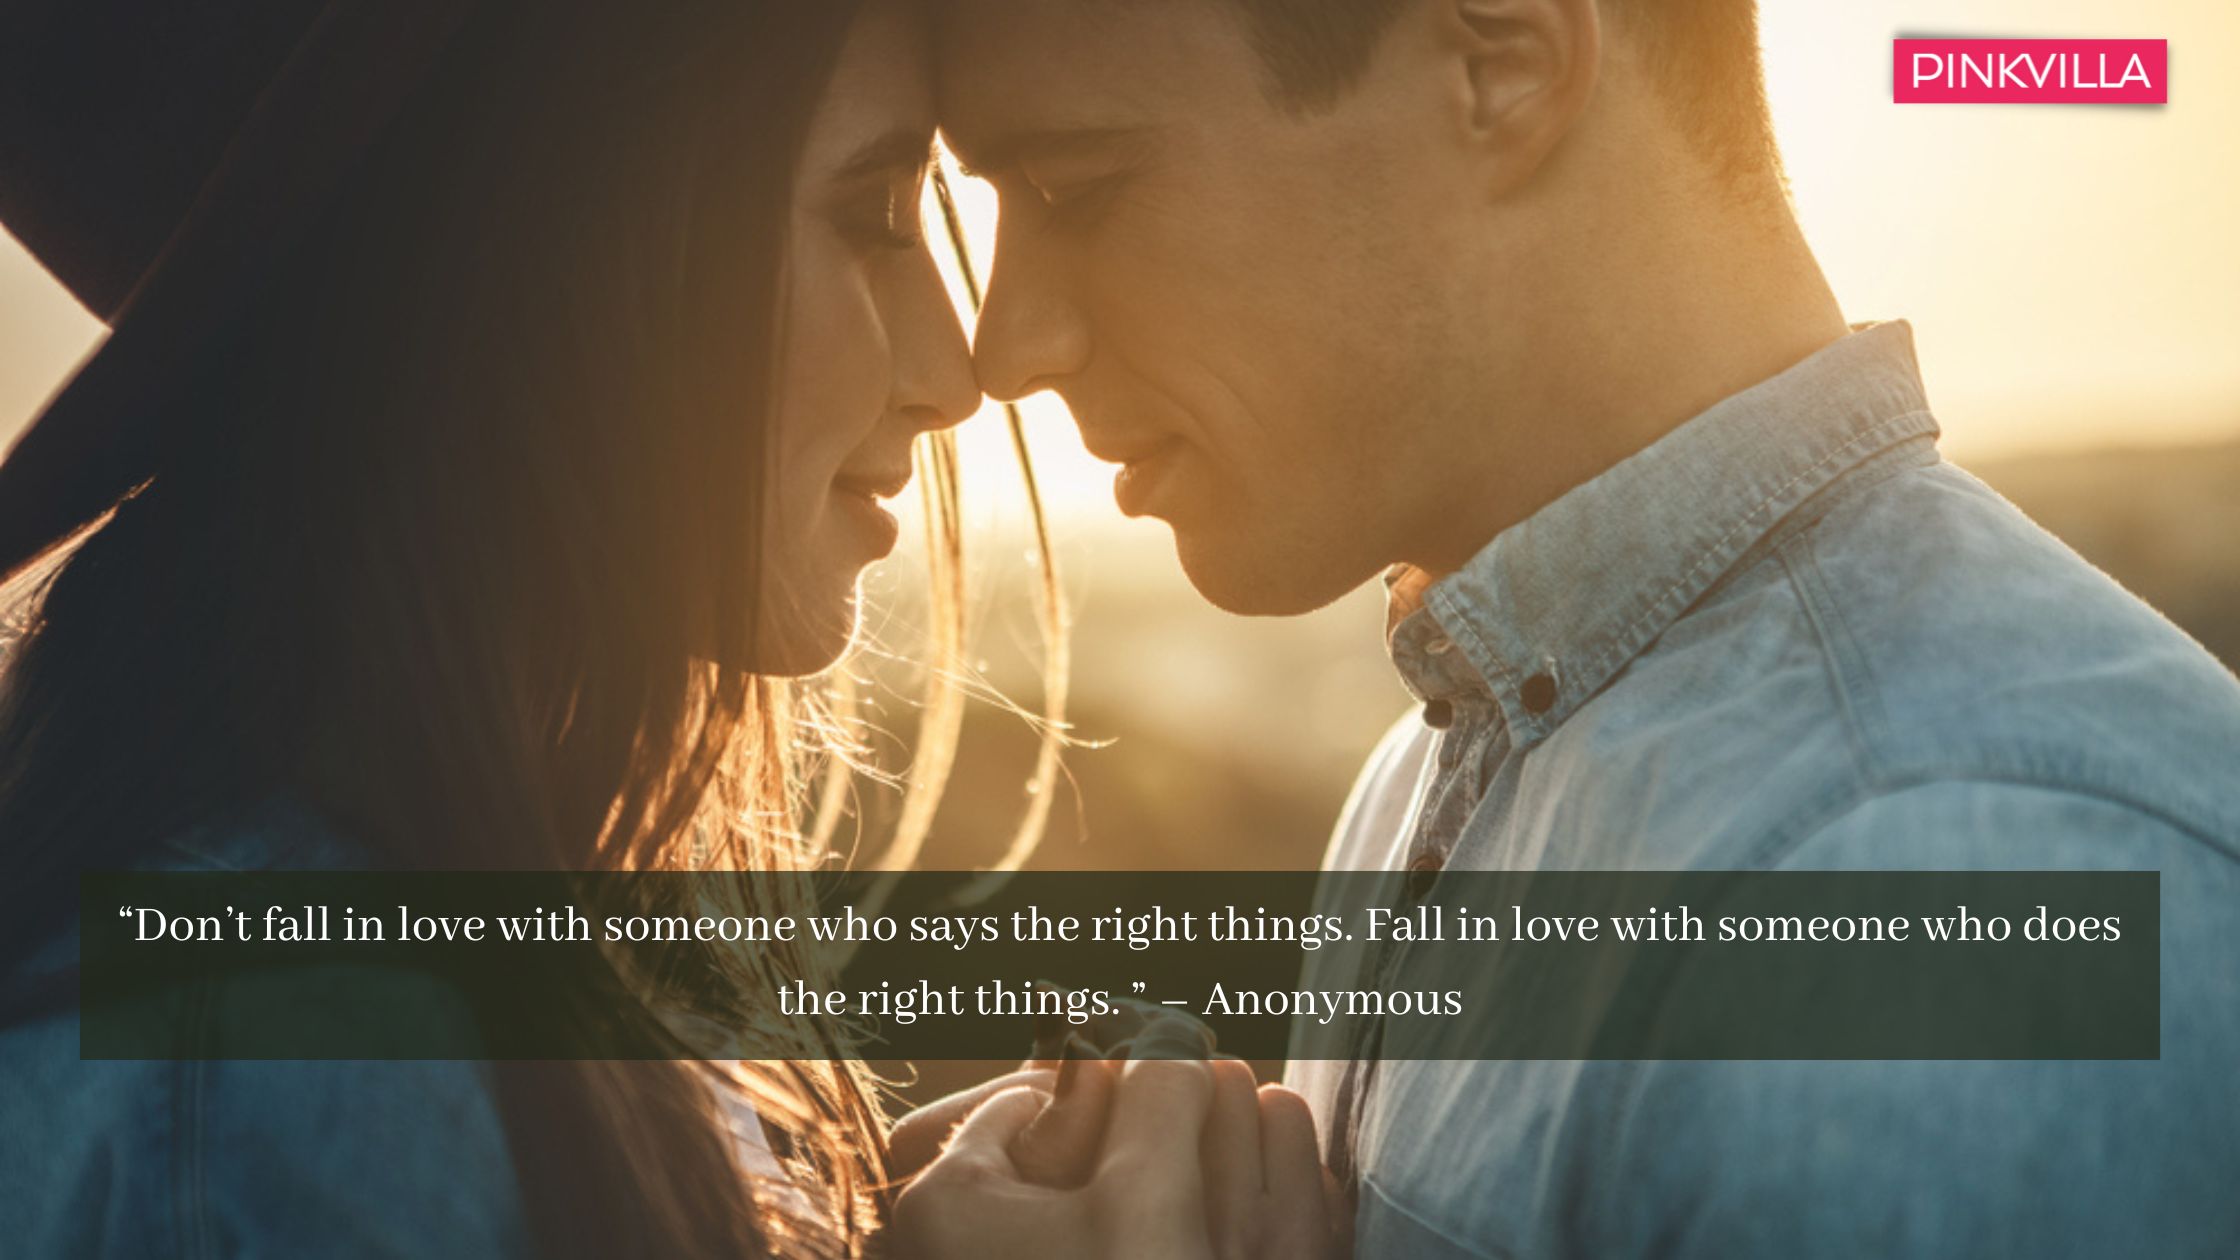 100 Heartwarming Waiting for Love Quotes For Hopeful Hearts | PINKVILLA